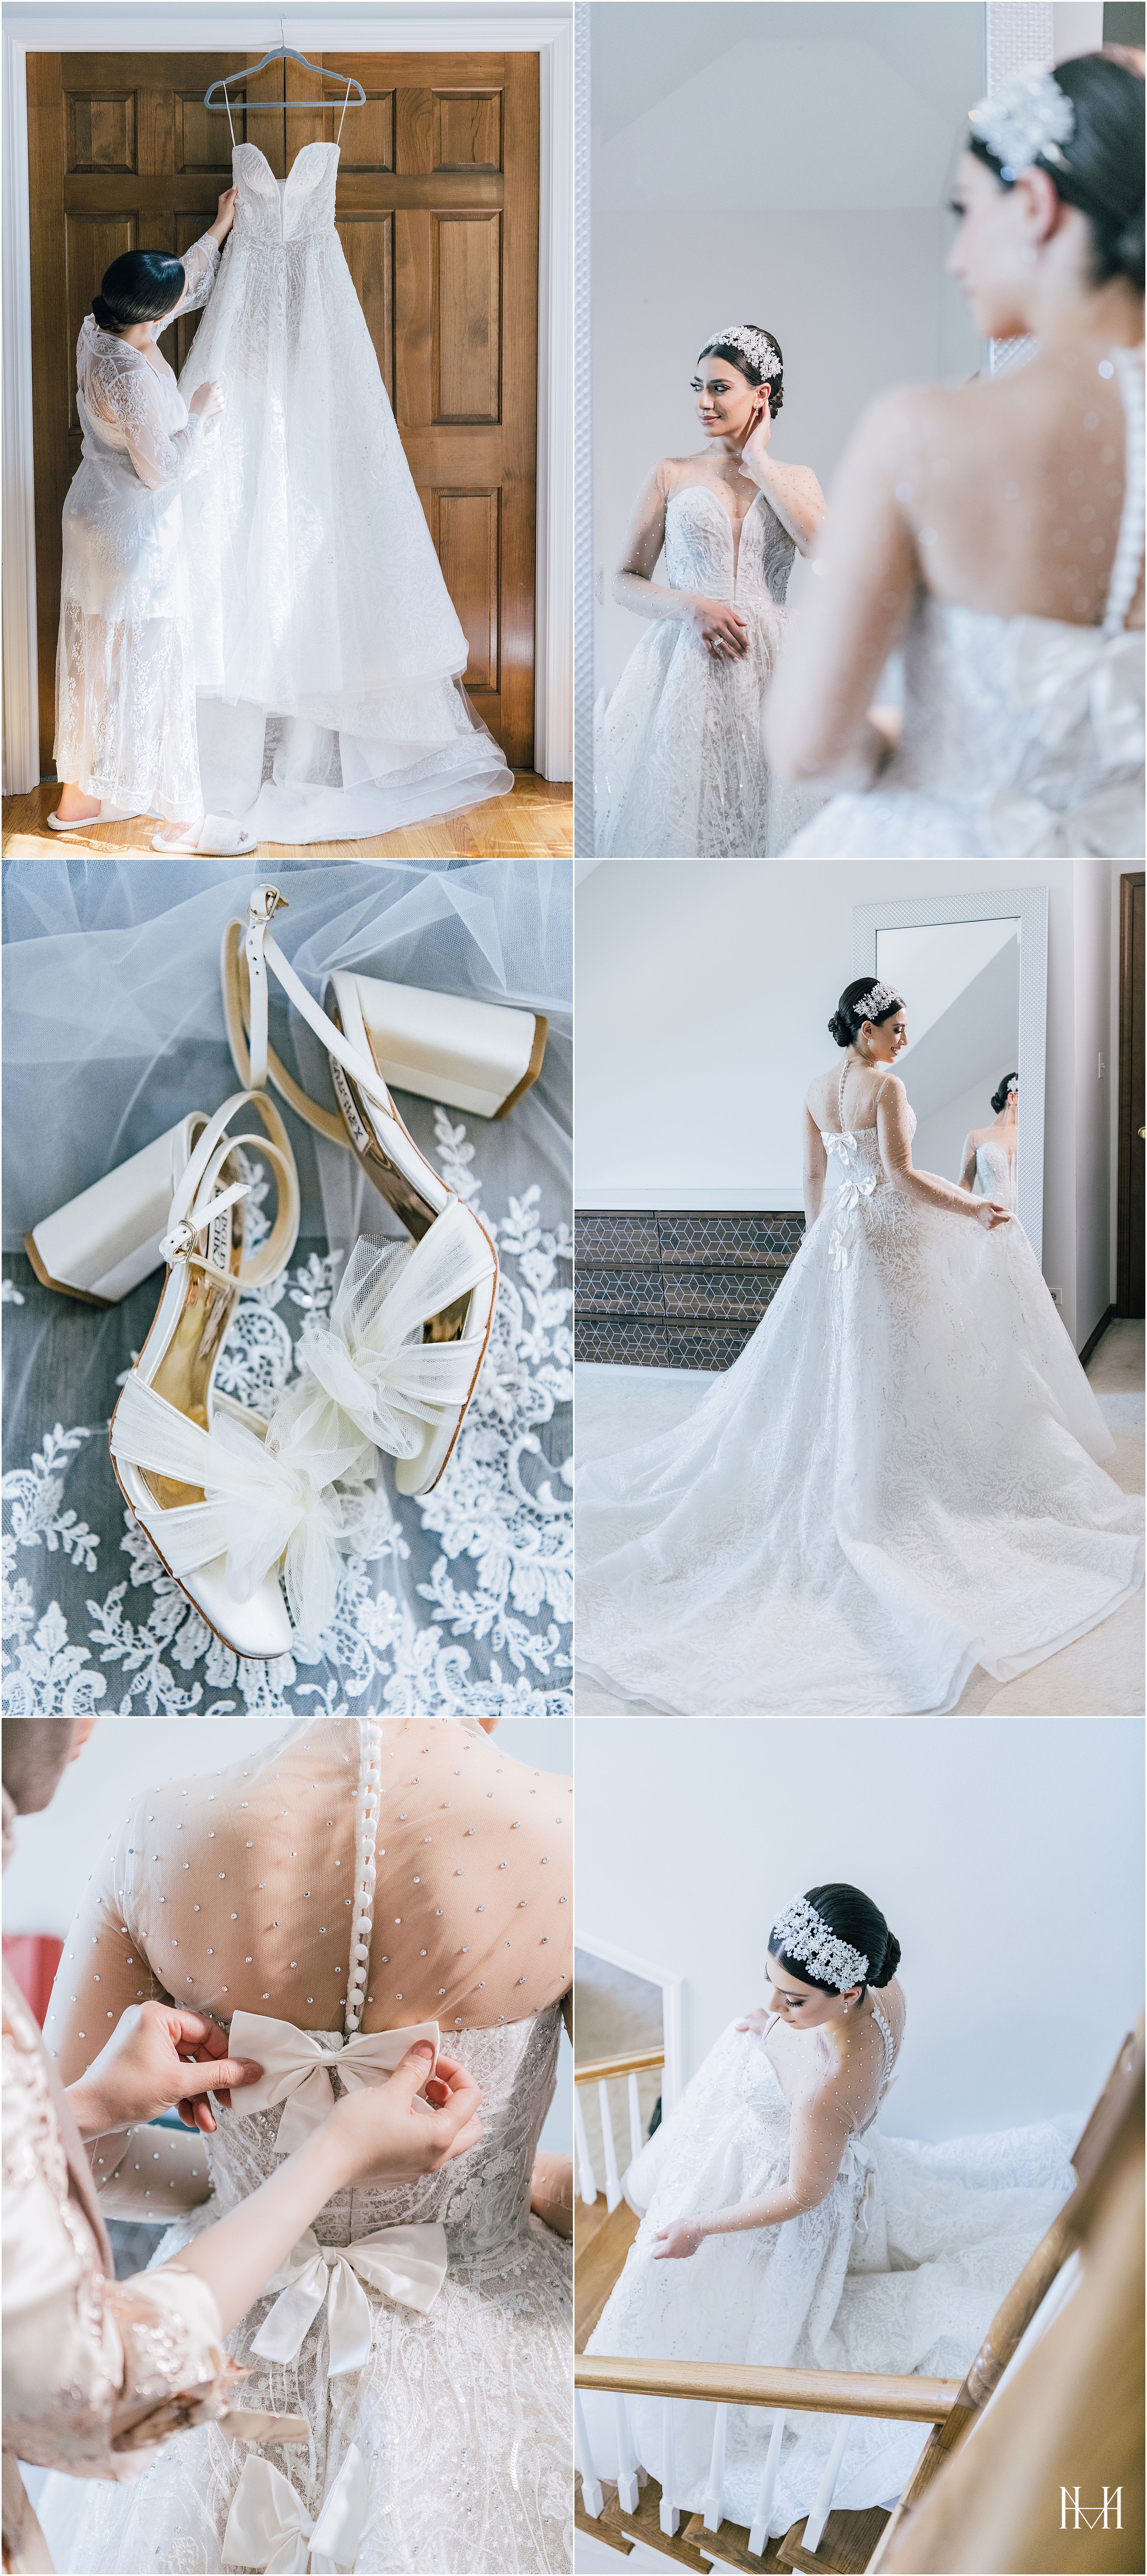 Bride wearing Reem Acra wedding dress and getting ready in her home. Chicago wedding photographer Maha Studios